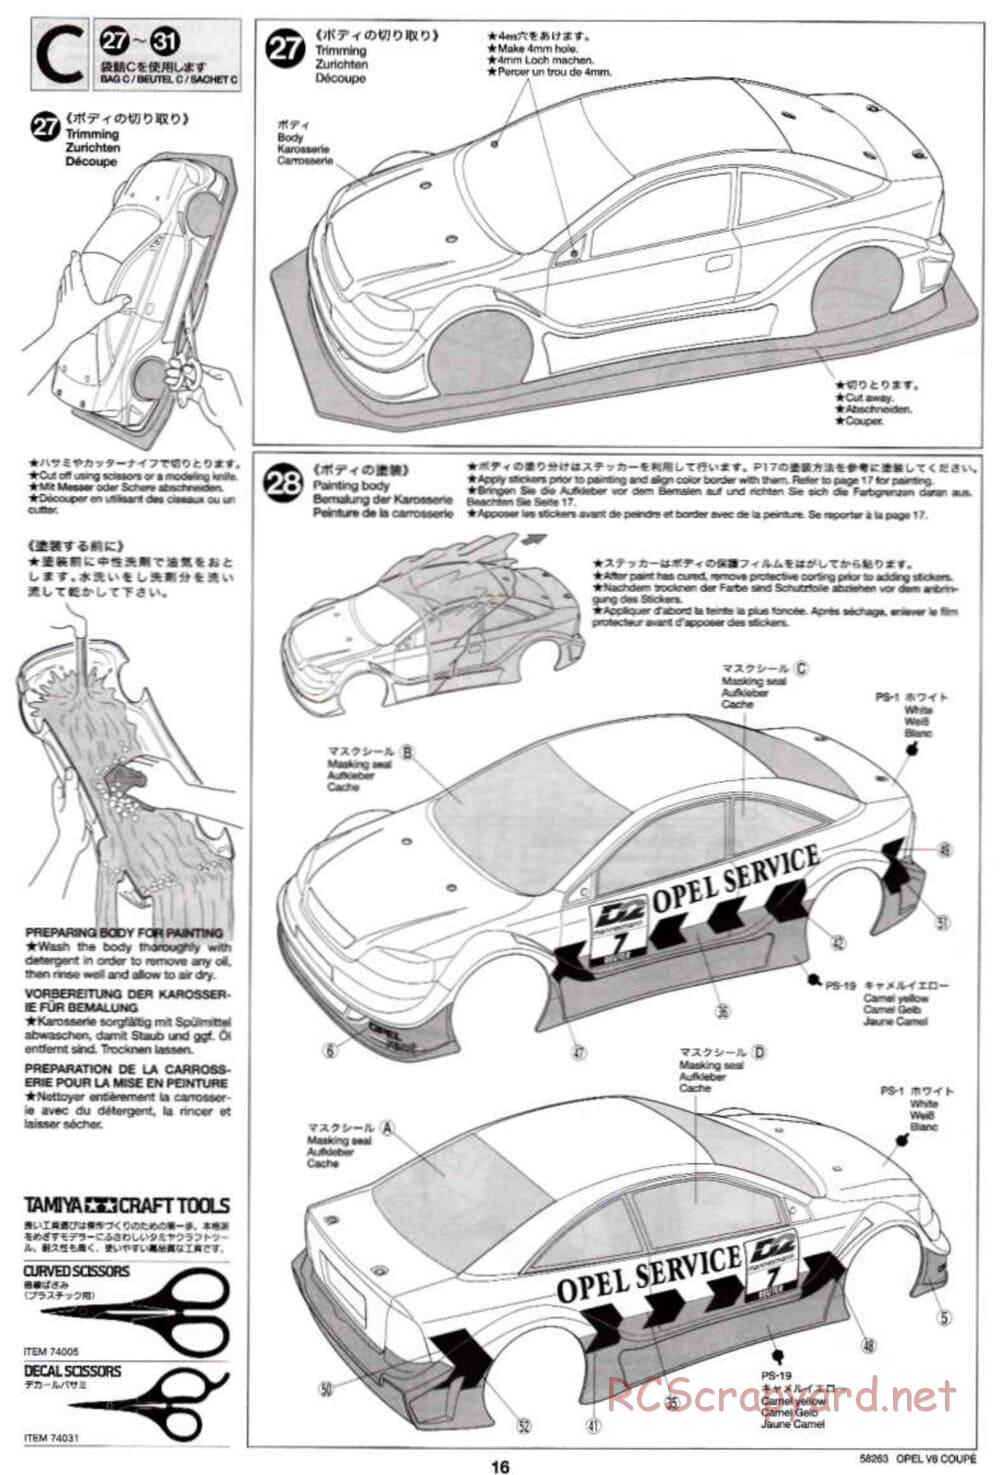 Tamiya - Opel V8 Coupe - TL-01 Chassis - Manual - Page 16